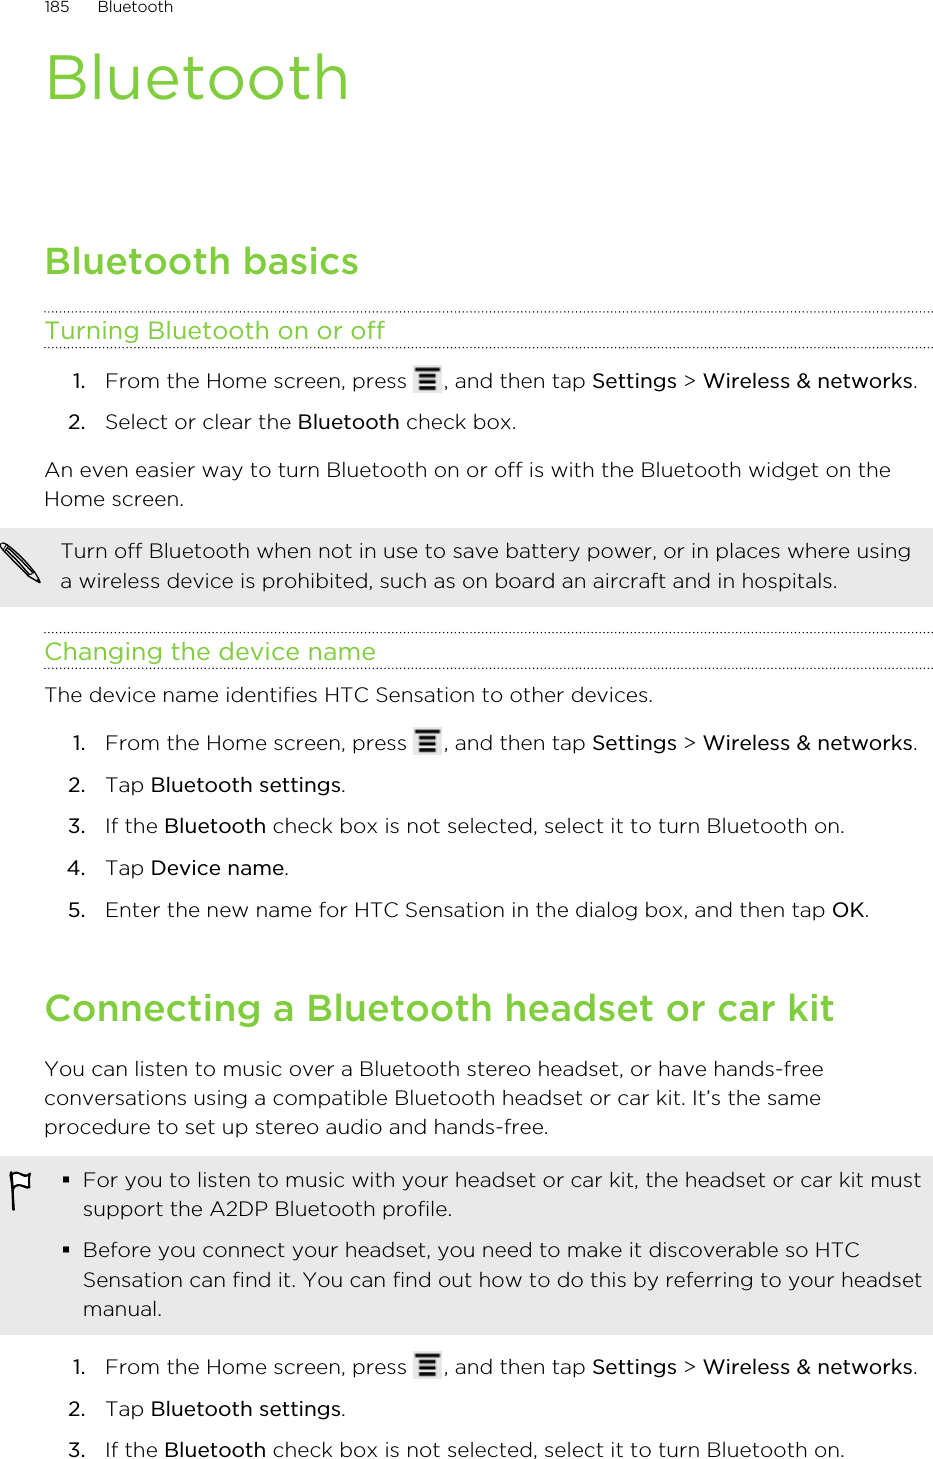 BluetoothBluetooth basicsTurning Bluetooth on or off1. From the Home screen, press  , and then tap Settings &gt; Wireless &amp; networks.2. Select or clear the Bluetooth check box.An even easier way to turn Bluetooth on or off is with the Bluetooth widget on theHome screen.Turn off Bluetooth when not in use to save battery power, or in places where usinga wireless device is prohibited, such as on board an aircraft and in hospitals.Changing the device nameThe device name identifies HTC Sensation to other devices.1. From the Home screen, press  , and then tap Settings &gt; Wireless &amp; networks.2. Tap Bluetooth settings.3. If the Bluetooth check box is not selected, select it to turn Bluetooth on.4. Tap Device name.5. Enter the new name for HTC Sensation in the dialog box, and then tap OK.Connecting a Bluetooth headset or car kitYou can listen to music over a Bluetooth stereo headset, or have hands-freeconversations using a compatible Bluetooth headset or car kit. It’s the sameprocedure to set up stereo audio and hands-free.§For you to listen to music with your headset or car kit, the headset or car kit mustsupport the A2DP Bluetooth profile.§Before you connect your headset, you need to make it discoverable so HTCSensation can find it. You can find out how to do this by referring to your headsetmanual.1. From the Home screen, press  , and then tap Settings &gt; Wireless &amp; networks.2. Tap Bluetooth settings.3. If the Bluetooth check box is not selected, select it to turn Bluetooth on.185 Bluetooth